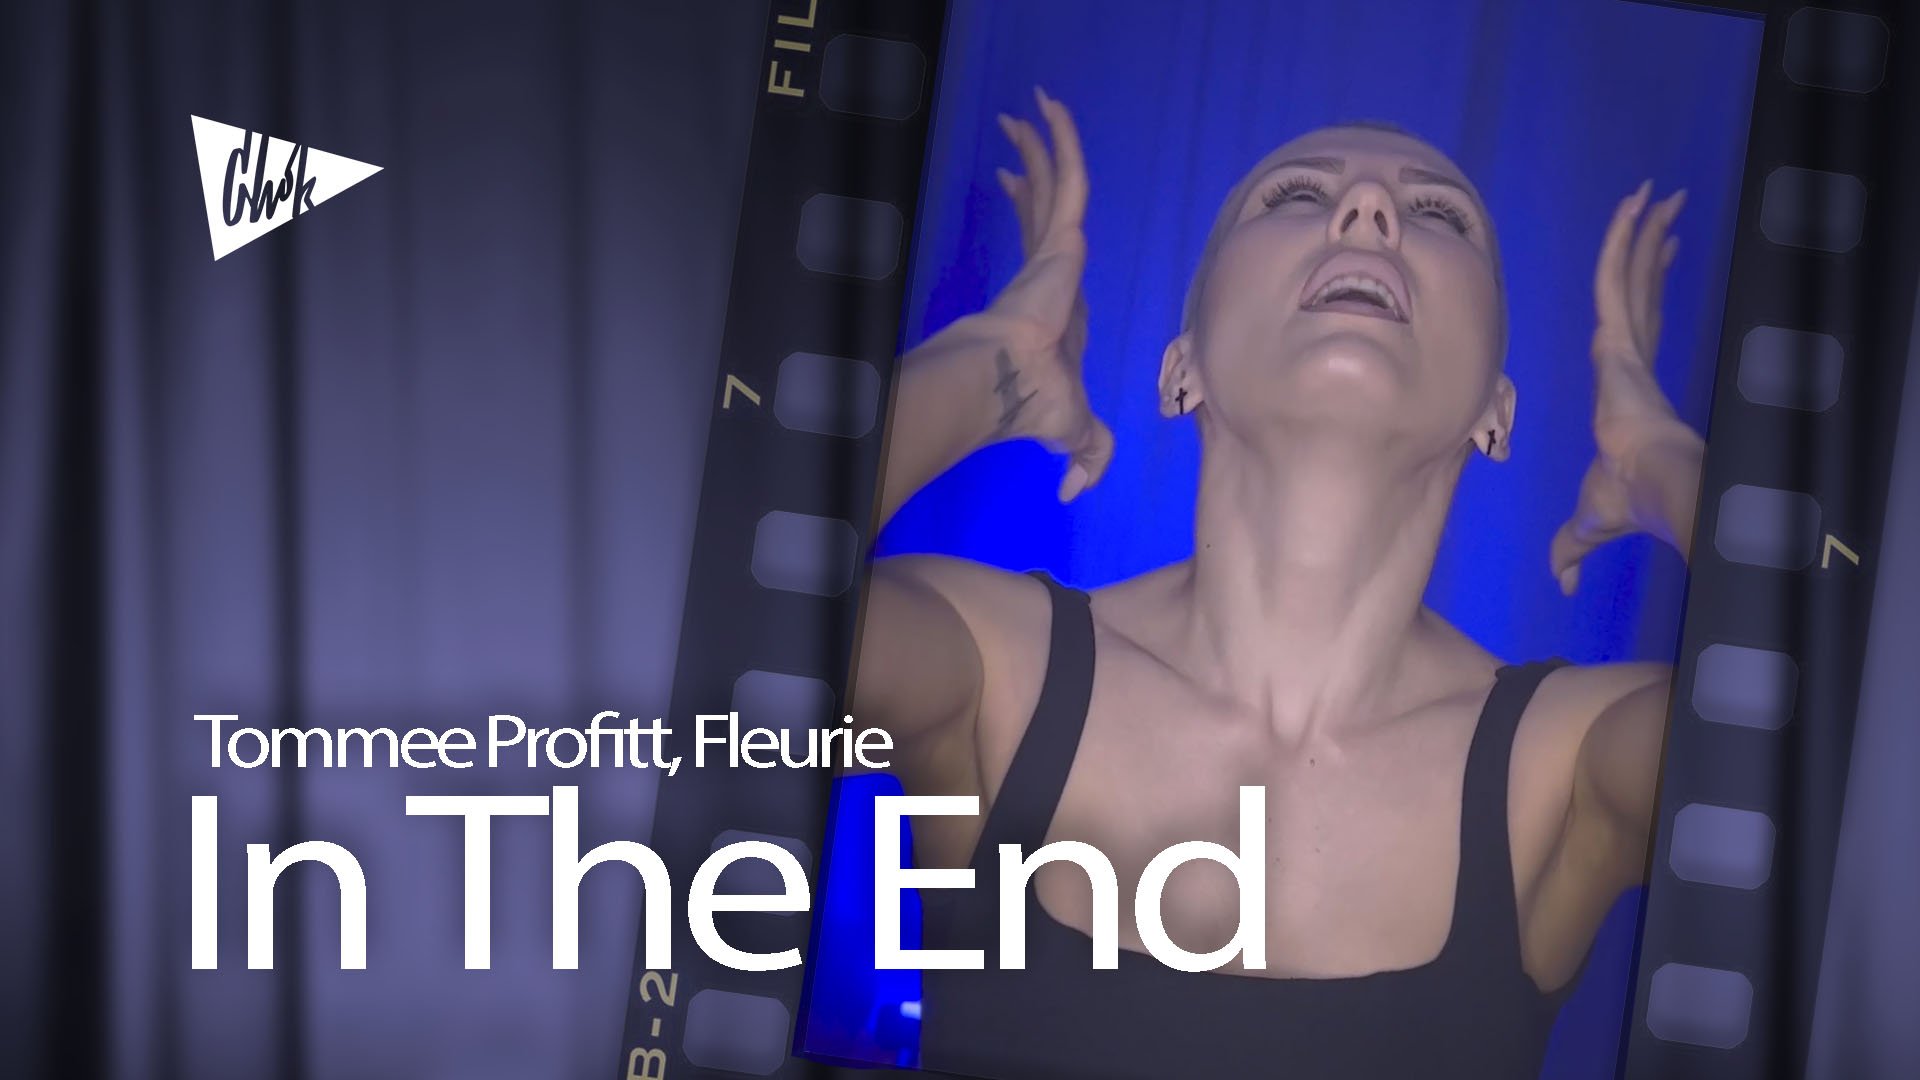 Tommee Profitt - In the End (Chok cover) .